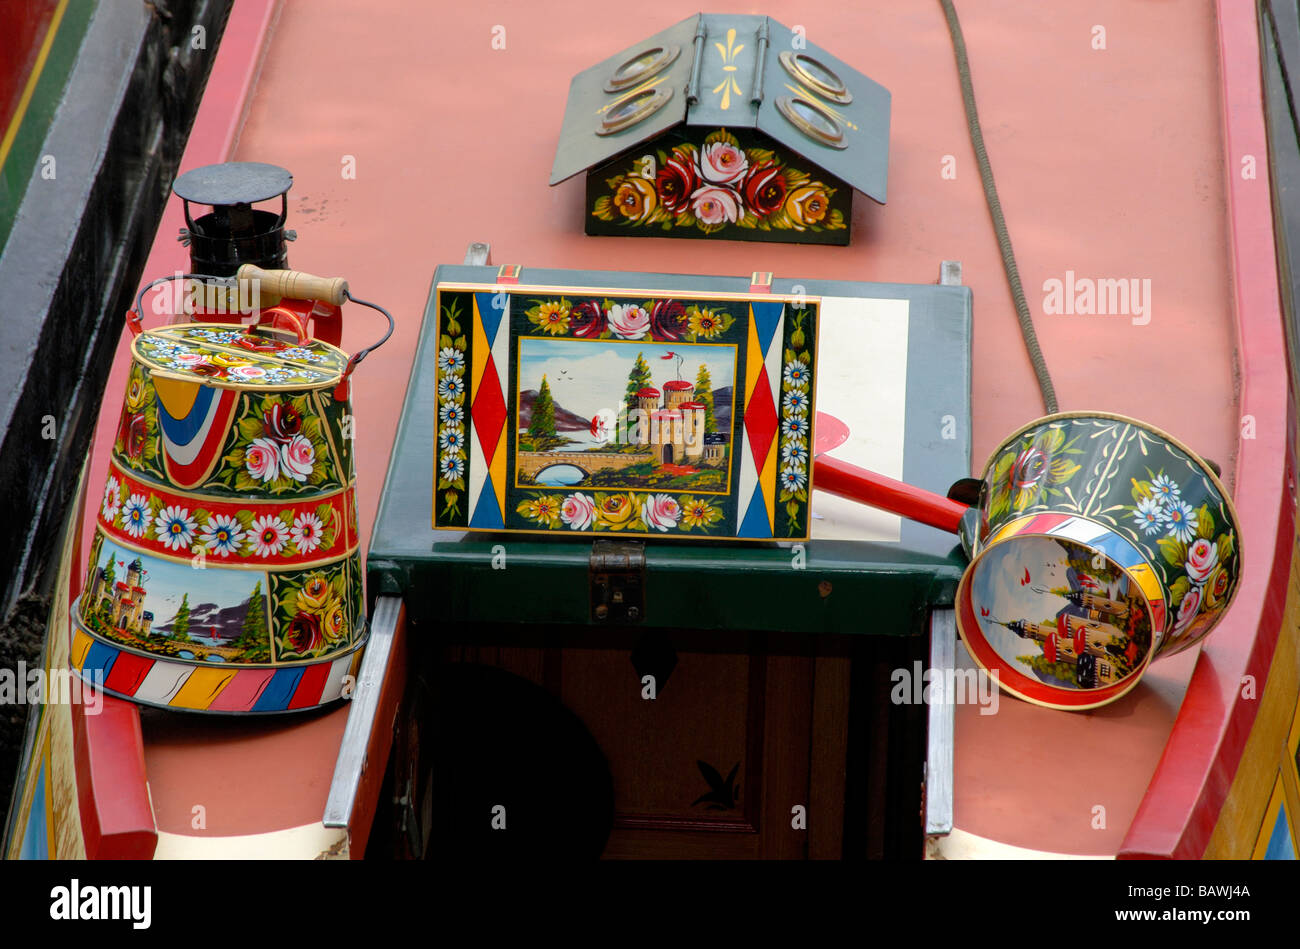 Canalware hand painted with traditional castles and roses around rear hatch and pigeon box of a narrowboat, London, England Stock Photo